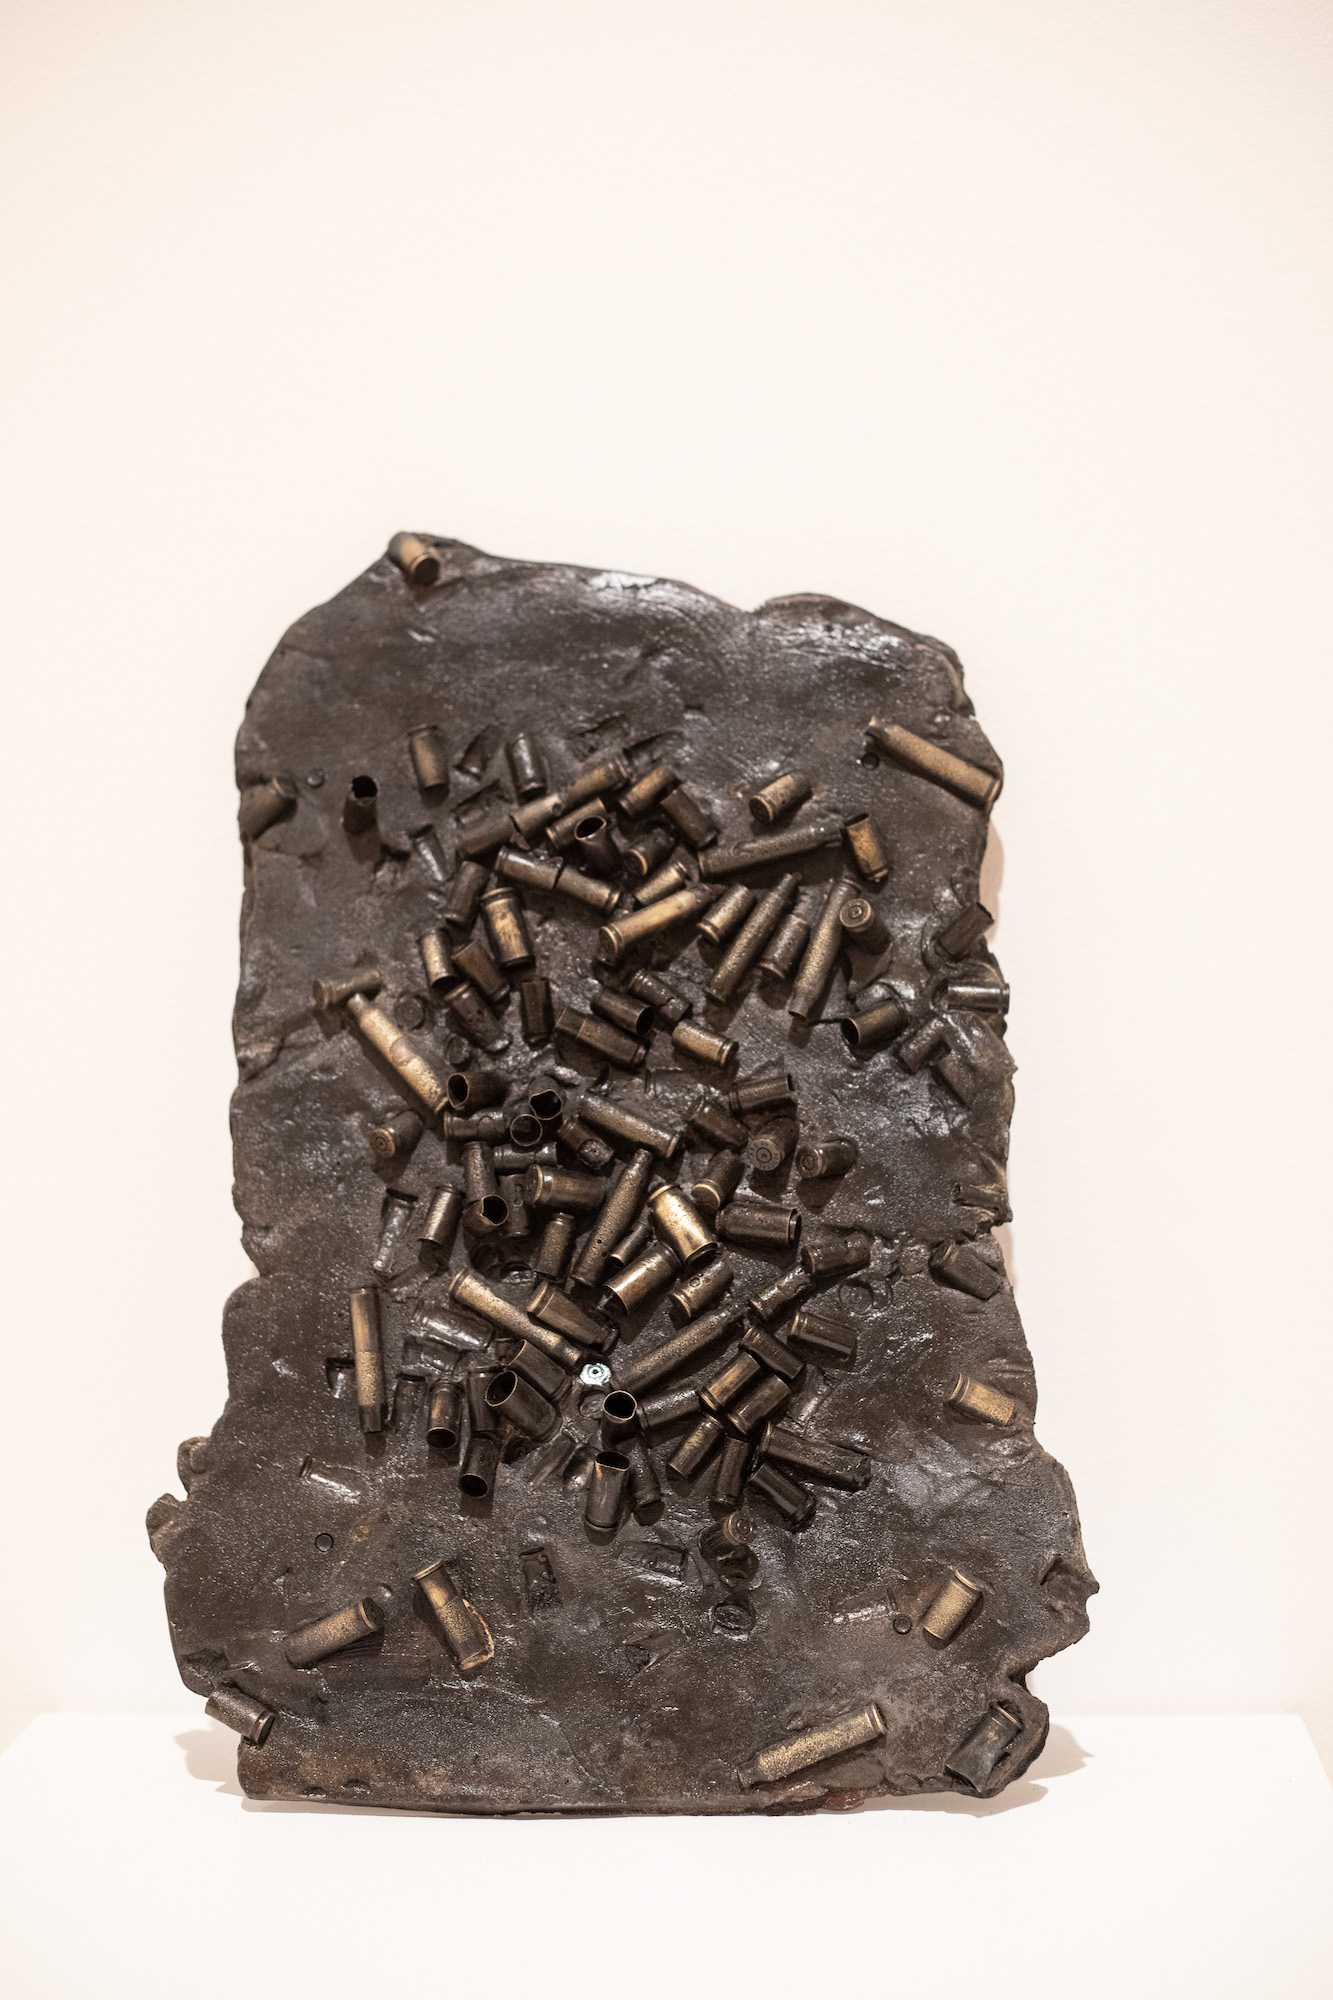 A dark mass of cast iron with bullet shells imbedded in it.